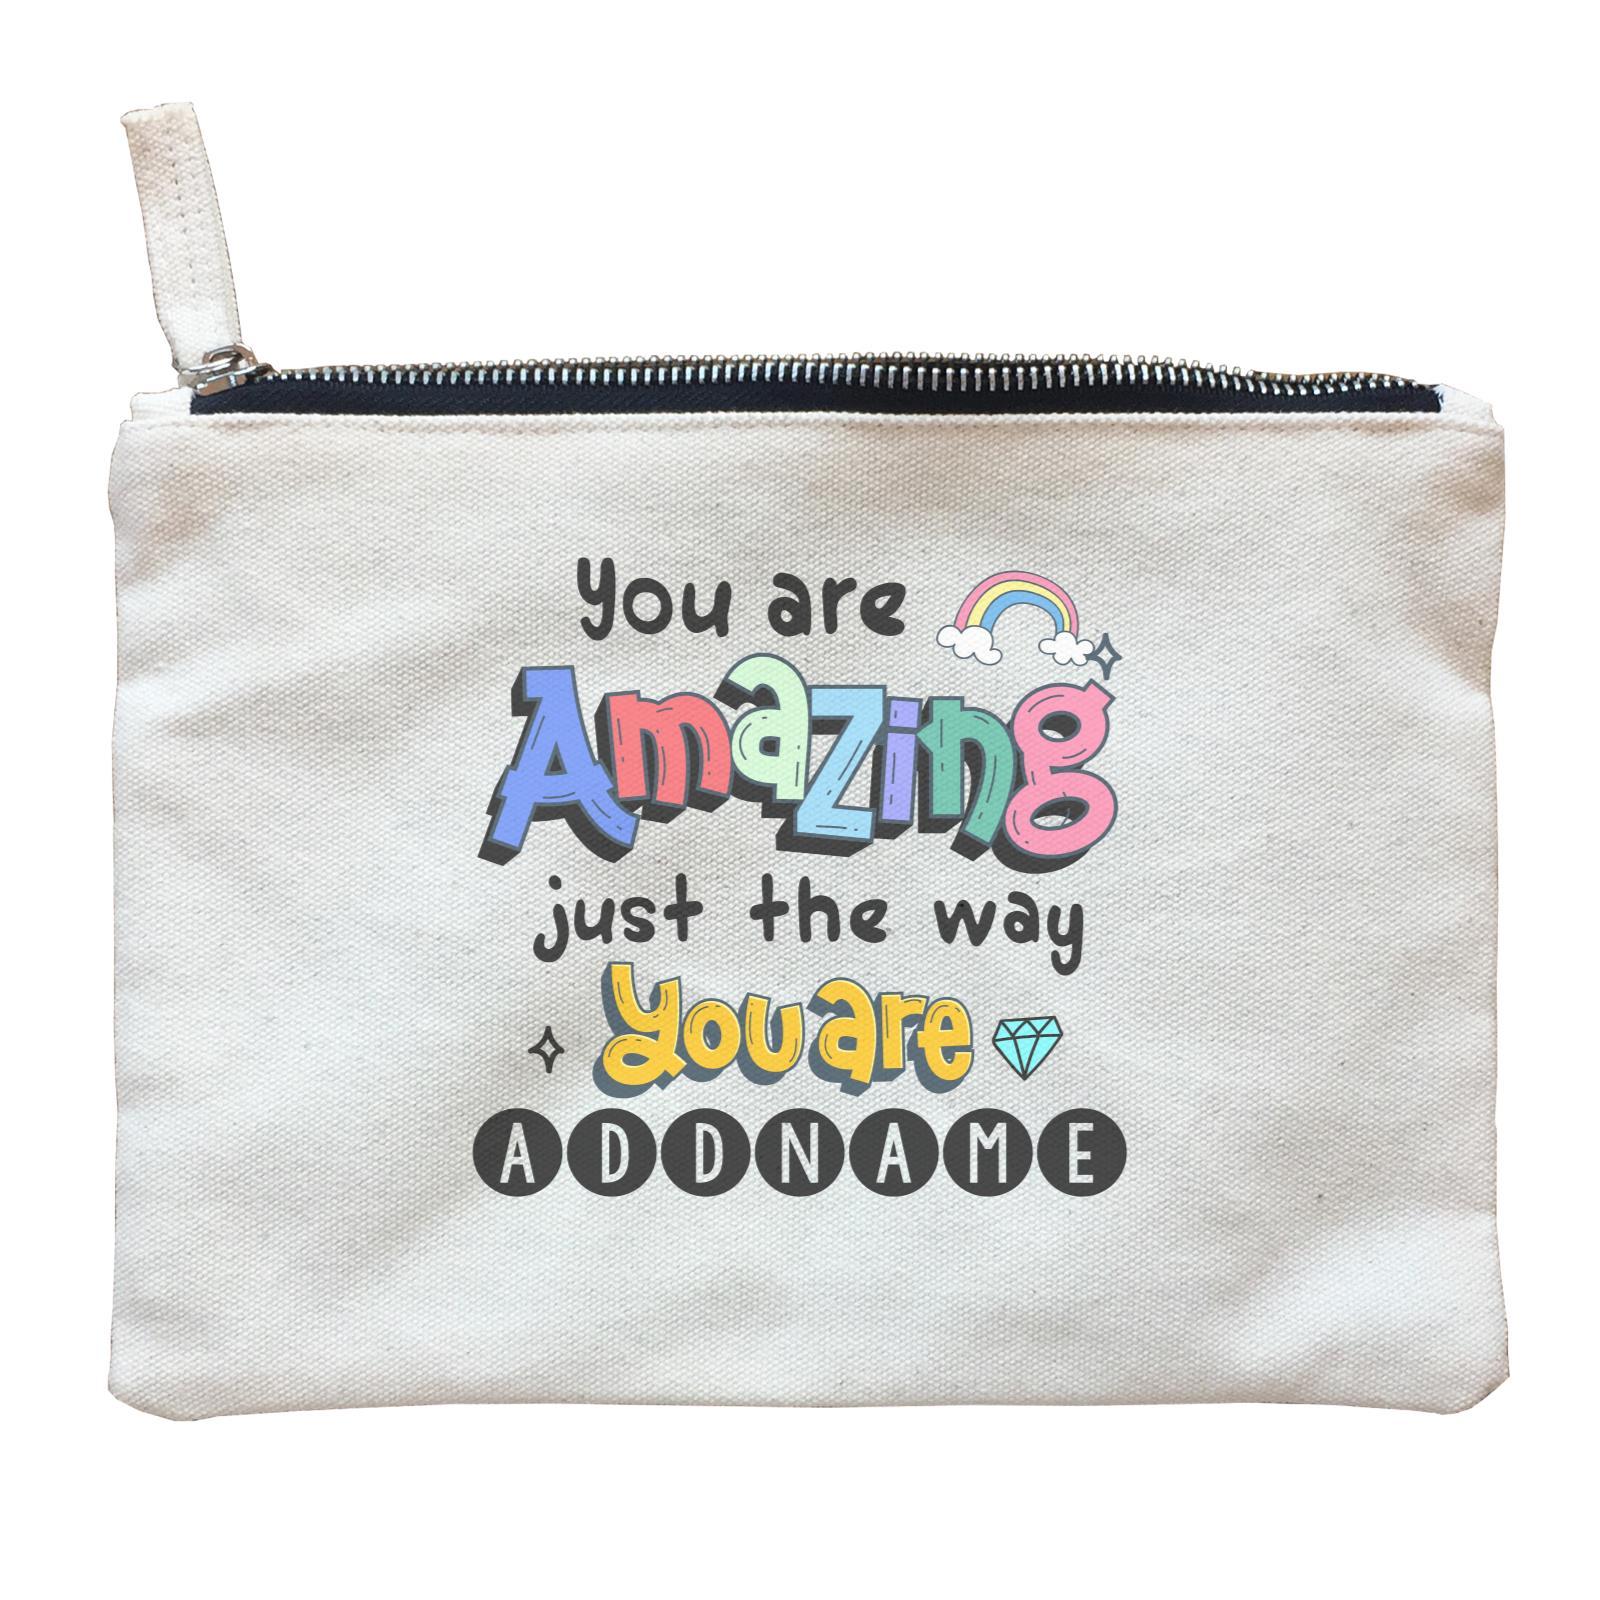 Children's Day Gift Series You Are Amazing Just The Way You Are Addname  Zipper Pouch